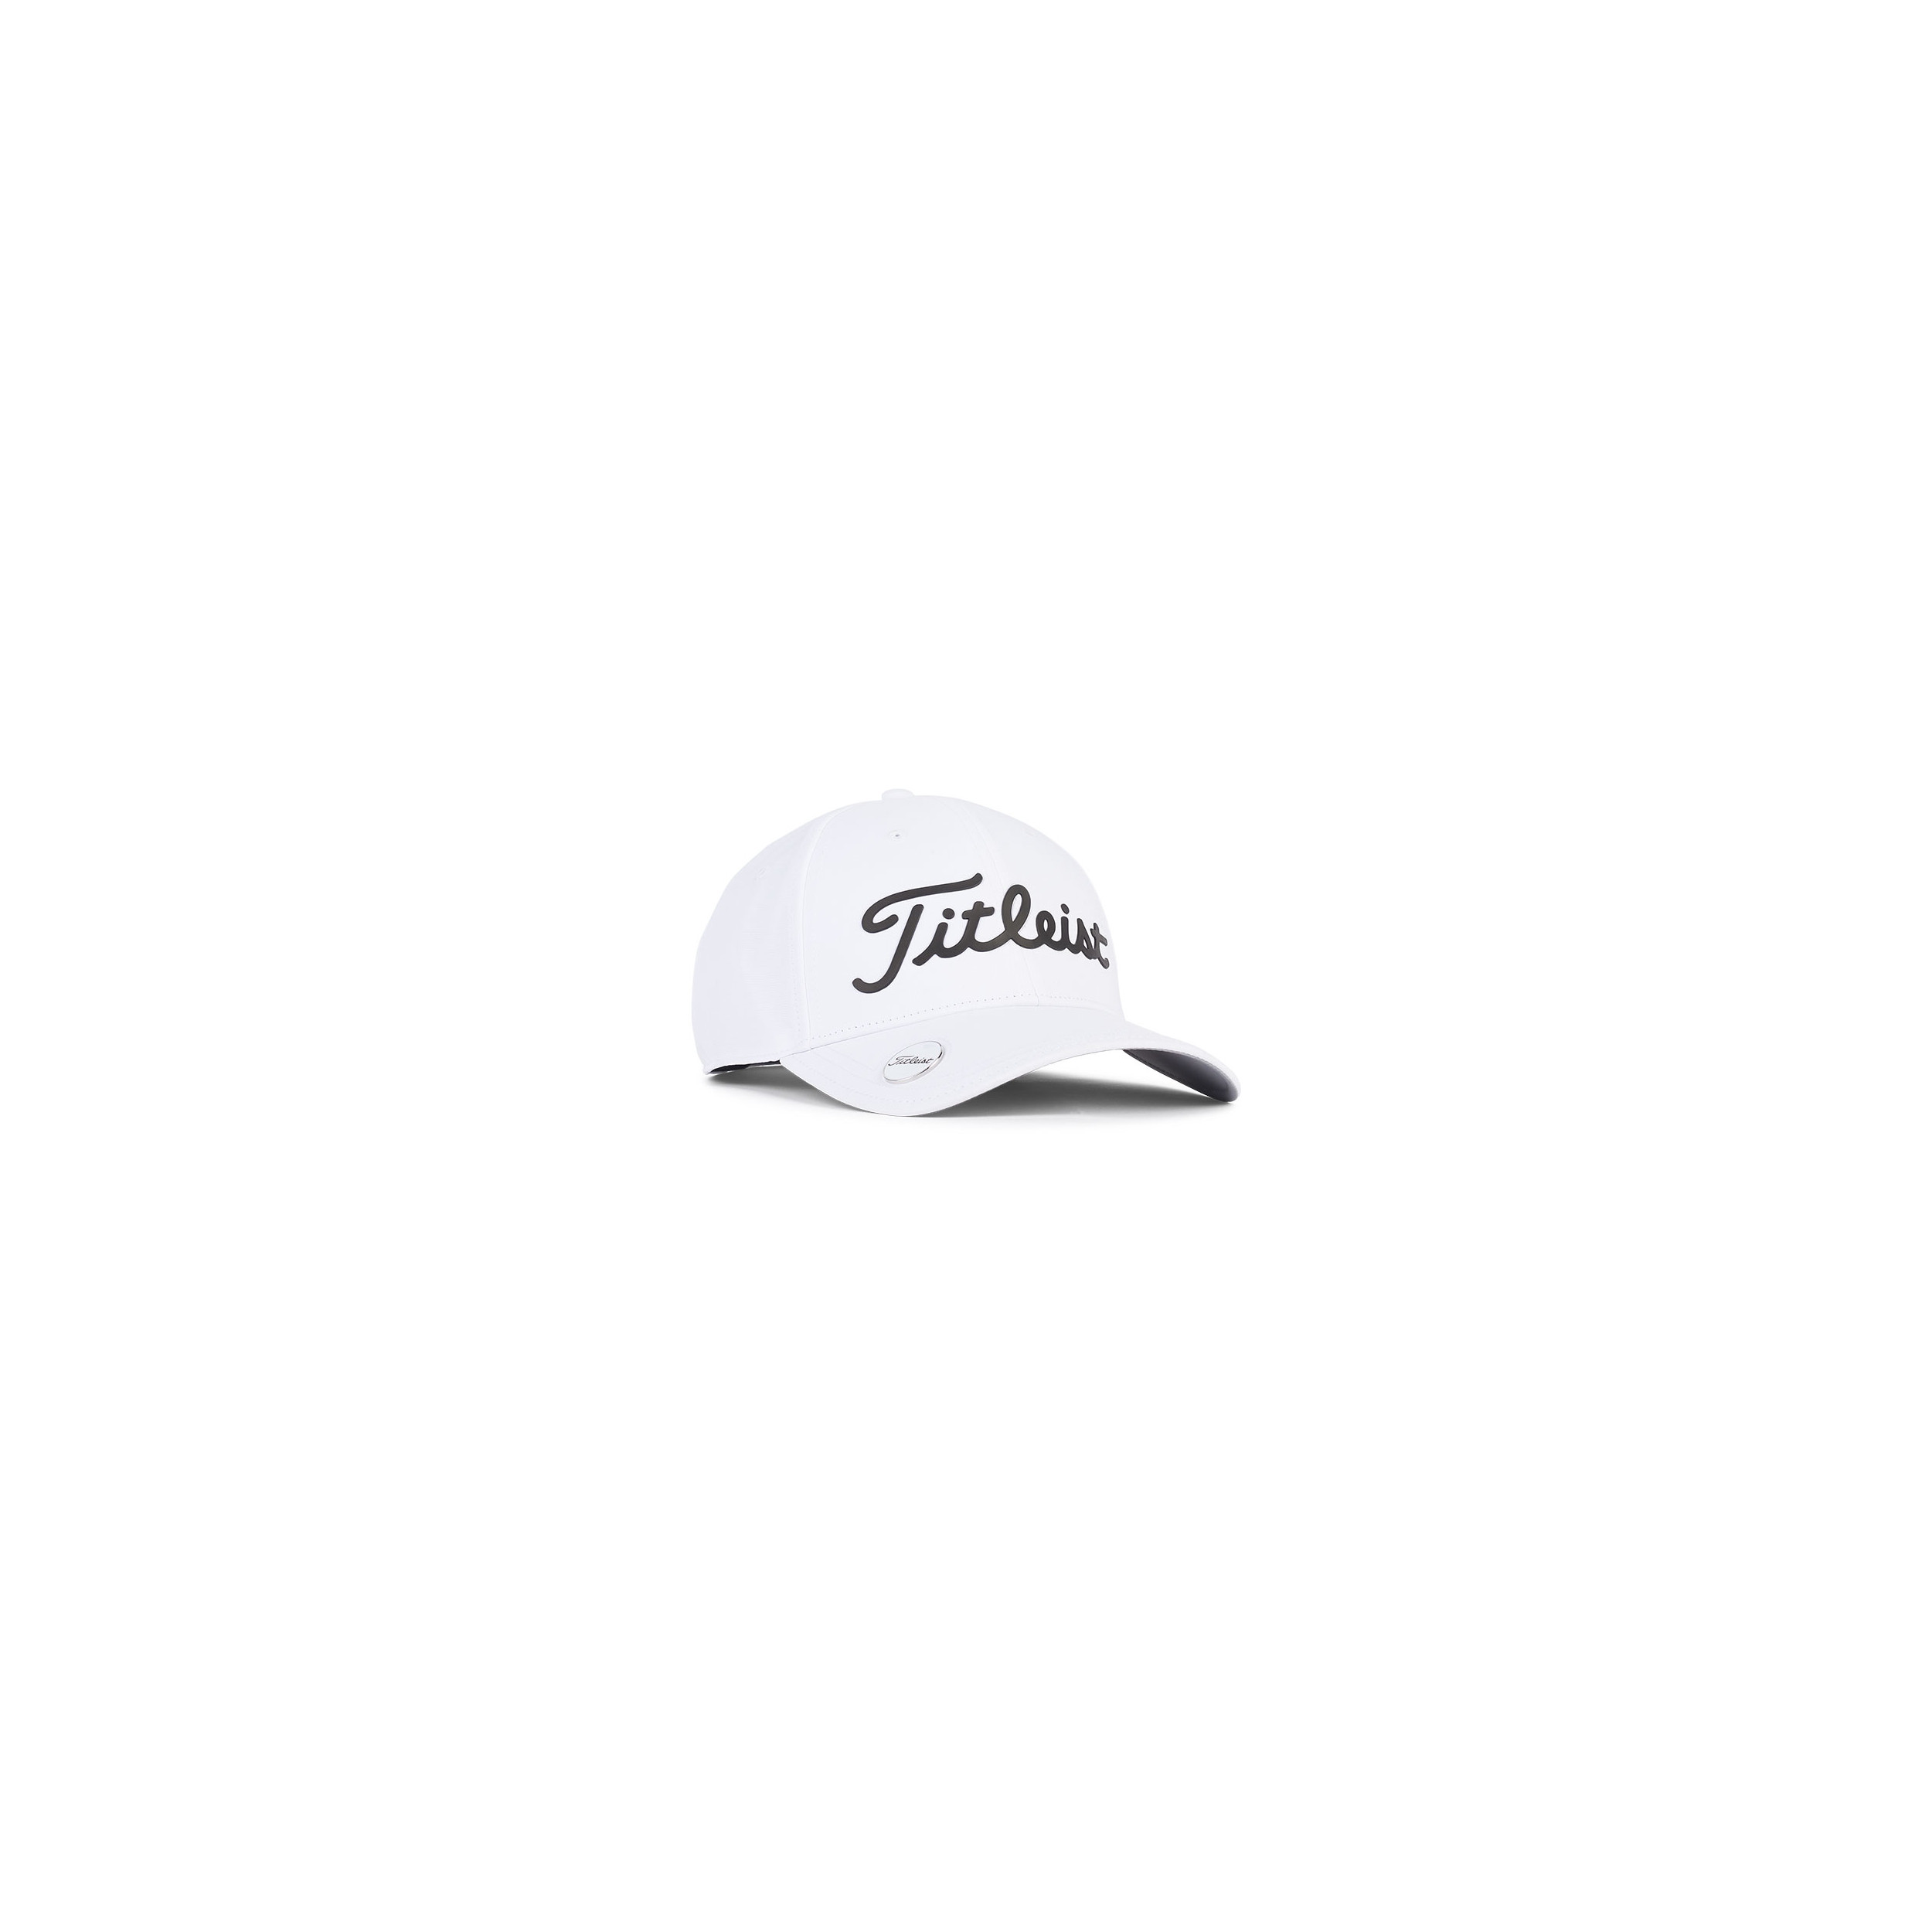 THE HAT TITLEIST THE JR PLAYERS. BALL MARKERS 